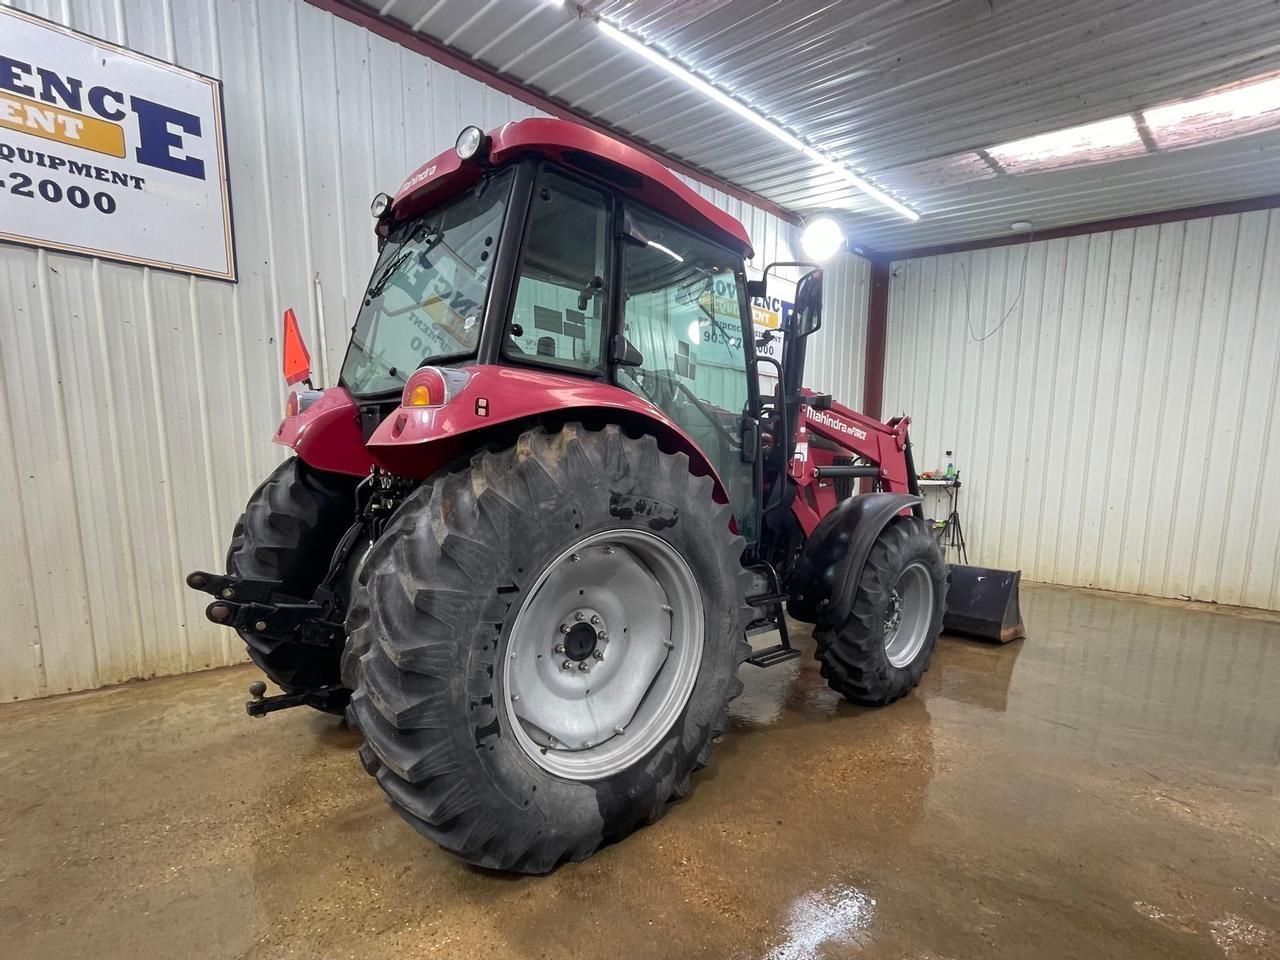 2019 Mahindra 105P Tractor with Cab and Loader